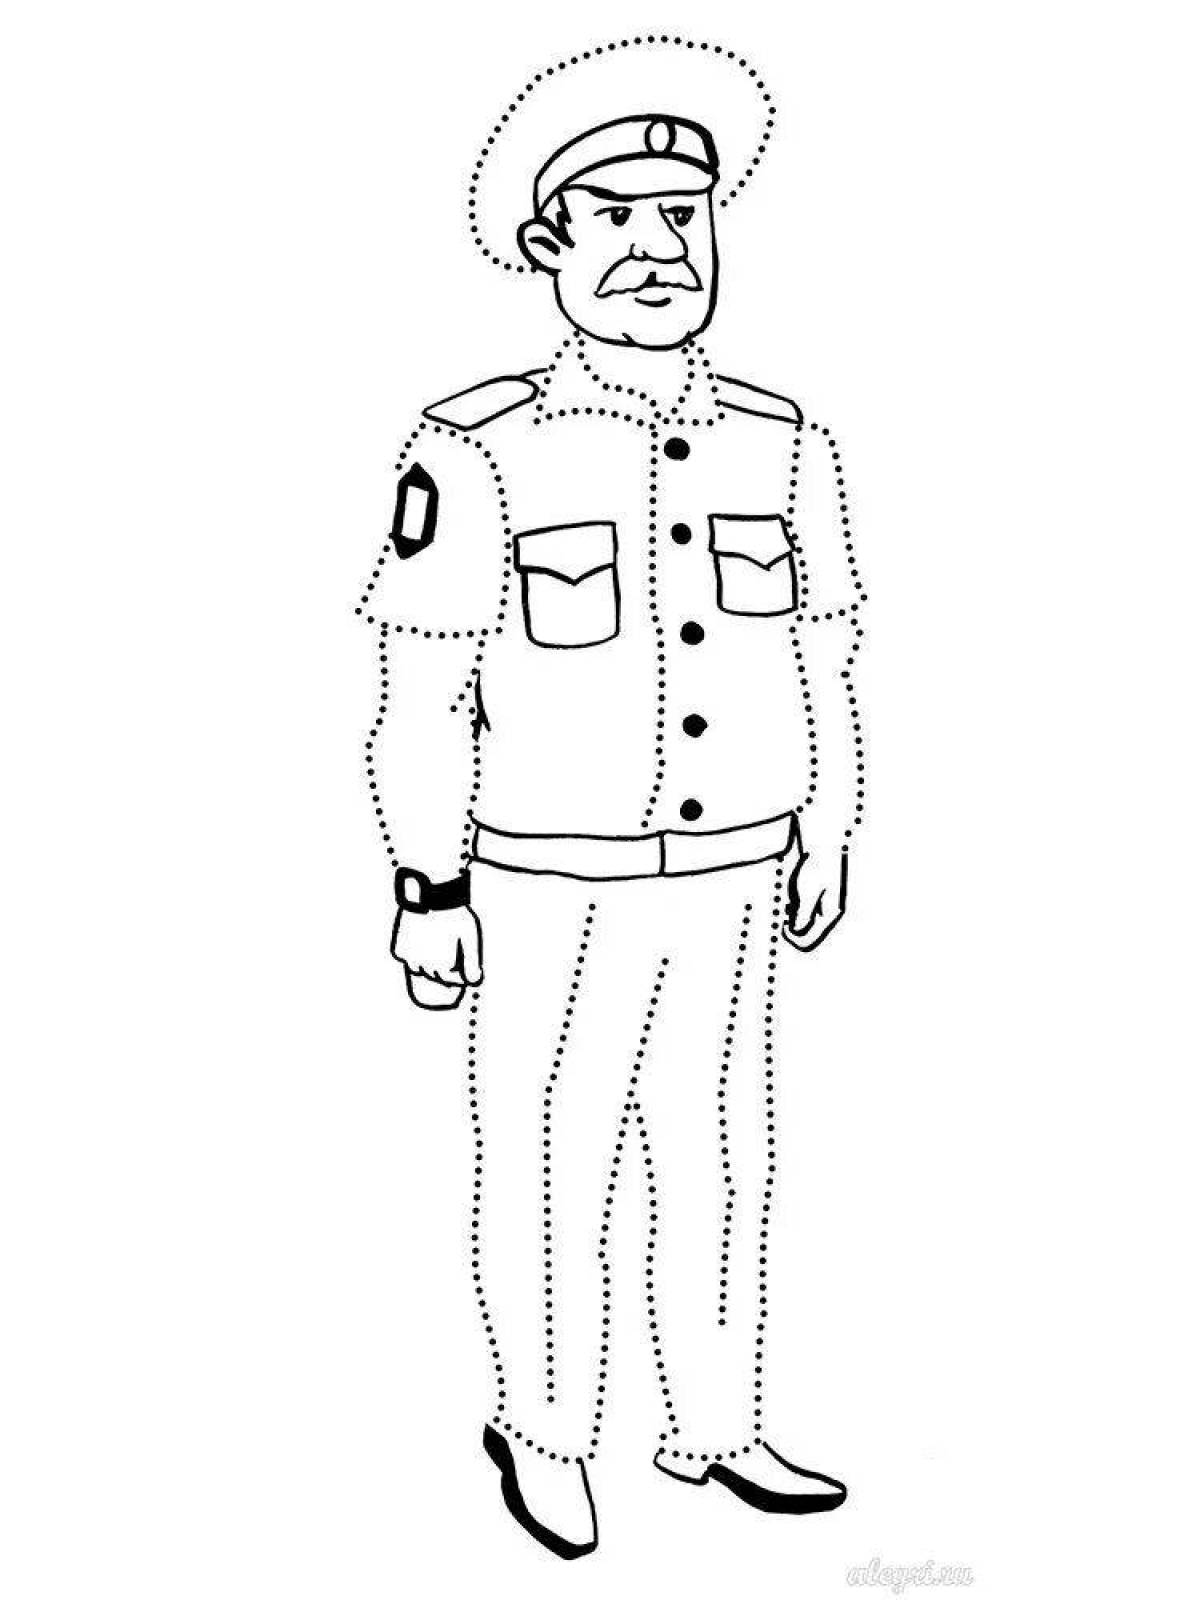 Heroic police coloring book